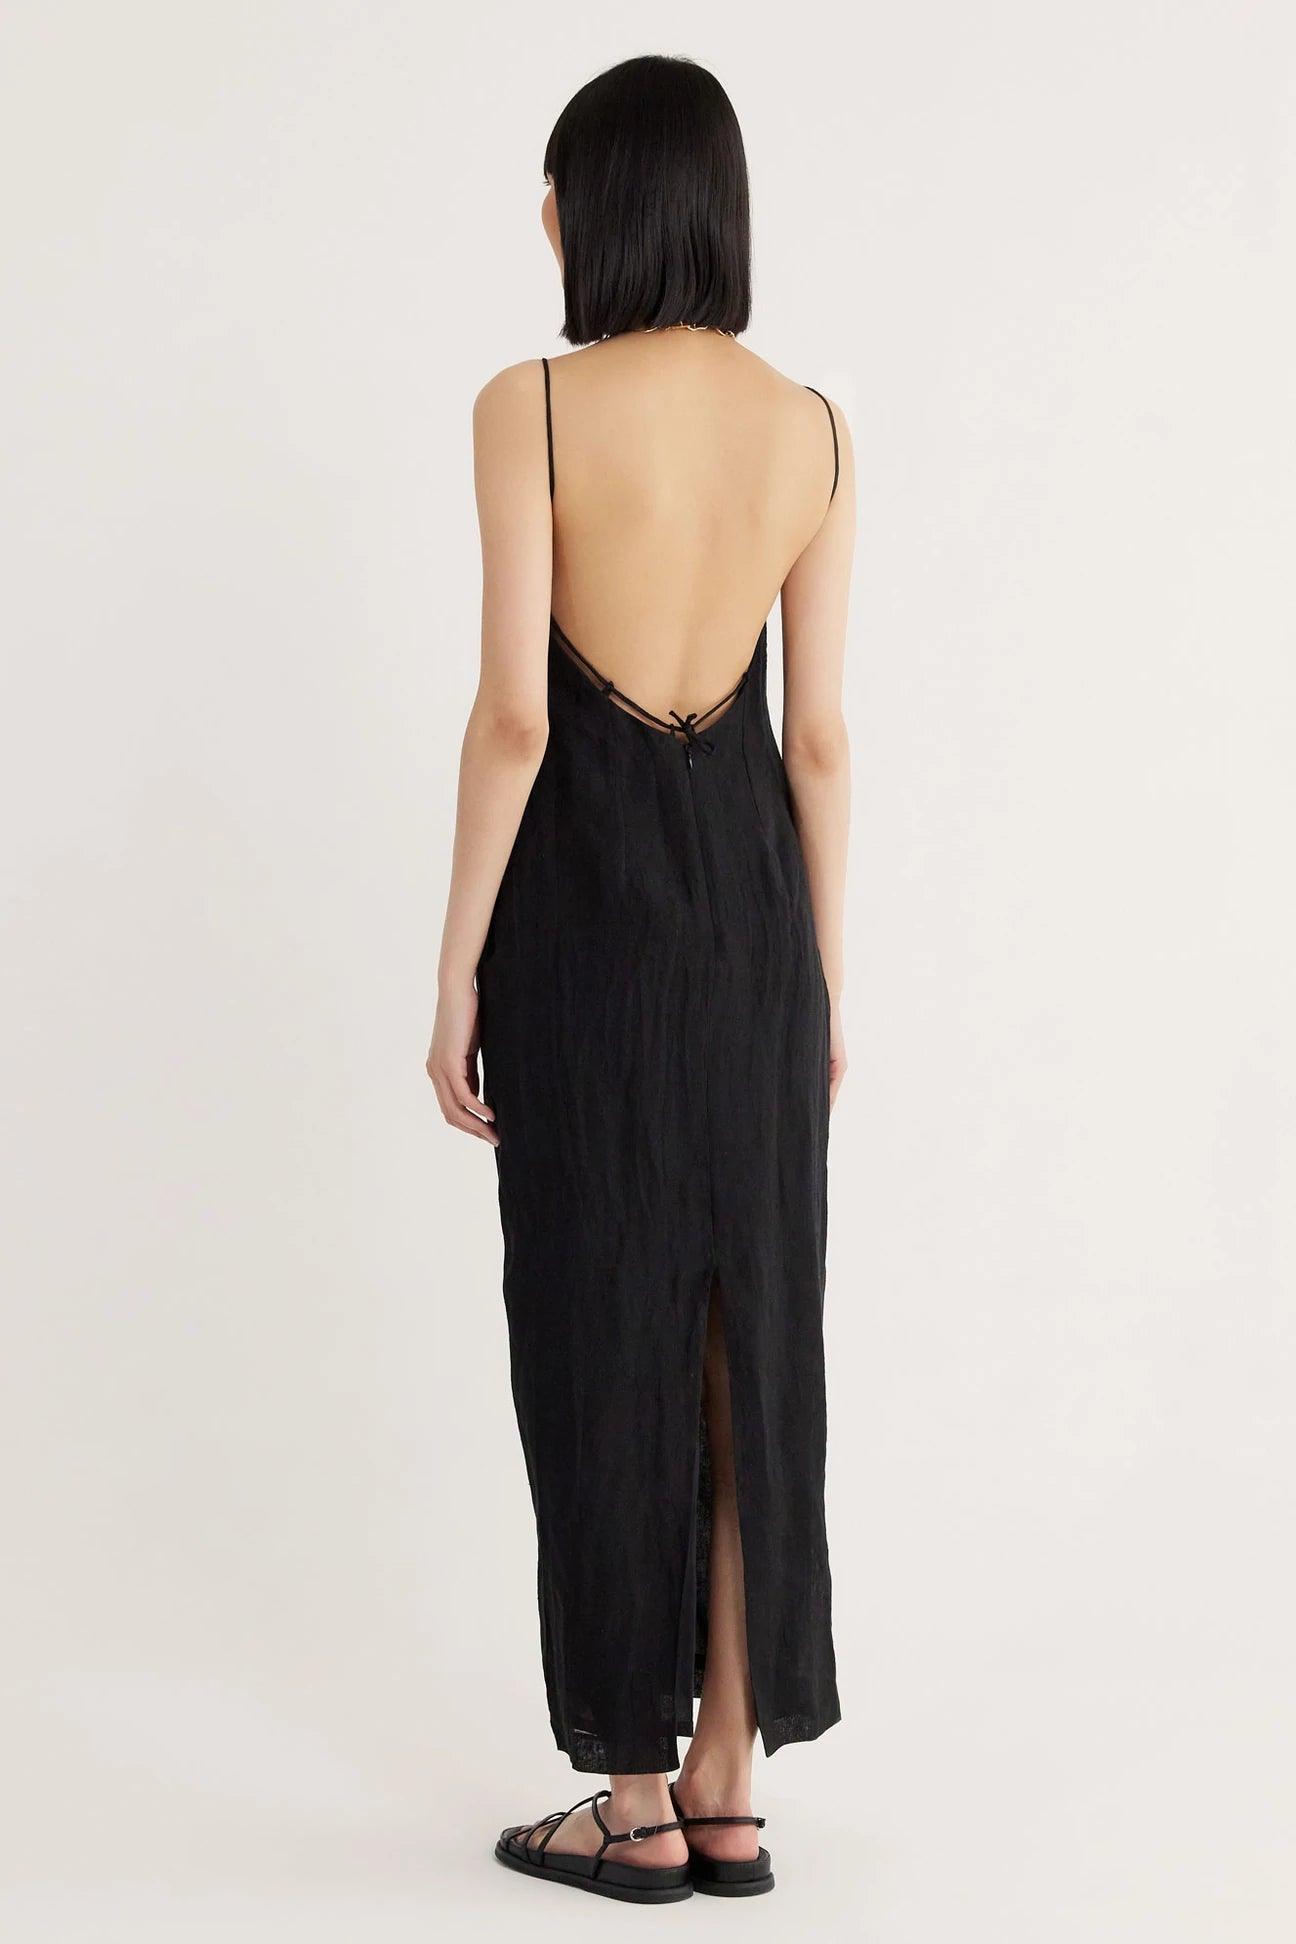 Mia Lace Back Maxi Dress by Rumer - Haven